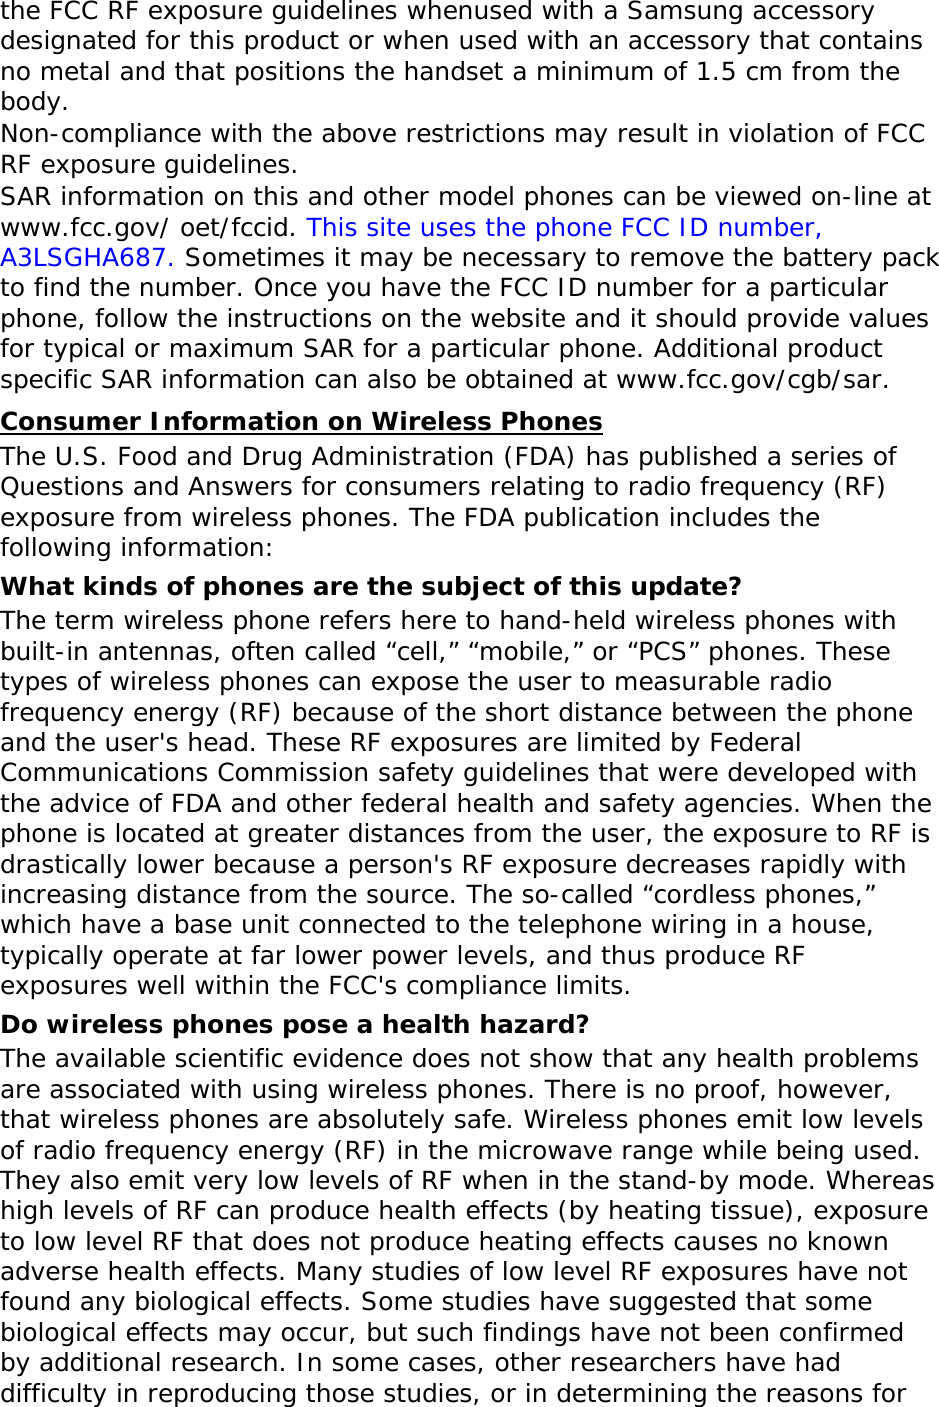 the FCC RF exposure guidelines whenused with a Samsung accessory designated for this product or when used with an accessory that contains no metal and that positions the handset a minimum of 1.5 cm from the body.  Non-compliance with the above restrictions may result in violation of FCC RF exposure guidelines. SAR information on this and other model phones can be viewed on-line at www.fcc.gov/ oet/fccid. This site uses the phone FCC ID number, A3LSGHA687. Sometimes it may be necessary to remove the battery pack to find the number. Once you have the FCC ID number for a particular phone, follow the instructions on the website and it should provide values for typical or maximum SAR for a particular phone. Additional product specific SAR information can also be obtained at www.fcc.gov/cgb/sar. Consumer Information on Wireless Phones The U.S. Food and Drug Administration (FDA) has published a series of Questions and Answers for consumers relating to radio frequency (RF) exposure from wireless phones. The FDA publication includes the following information: What kinds of phones are the subject of this update? The term wireless phone refers here to hand-held wireless phones with built-in antennas, often called “cell,” “mobile,” or “PCS” phones. These types of wireless phones can expose the user to measurable radio frequency energy (RF) because of the short distance between the phone and the user&apos;s head. These RF exposures are limited by Federal Communications Commission safety guidelines that were developed with the advice of FDA and other federal health and safety agencies. When the phone is located at greater distances from the user, the exposure to RF is drastically lower because a person&apos;s RF exposure decreases rapidly with increasing distance from the source. The so-called “cordless phones,” which have a base unit connected to the telephone wiring in a house, typically operate at far lower power levels, and thus produce RF exposures well within the FCC&apos;s compliance limits. Do wireless phones pose a health hazard? The available scientific evidence does not show that any health problems are associated with using wireless phones. There is no proof, however, that wireless phones are absolutely safe. Wireless phones emit low levels of radio frequency energy (RF) in the microwave range while being used. They also emit very low levels of RF when in the stand-by mode. Whereas high levels of RF can produce health effects (by heating tissue), exposure to low level RF that does not produce heating effects causes no known adverse health effects. Many studies of low level RF exposures have not found any biological effects. Some studies have suggested that some biological effects may occur, but such findings have not been confirmed by additional research. In some cases, other researchers have had difficulty in reproducing those studies, or in determining the reasons for 